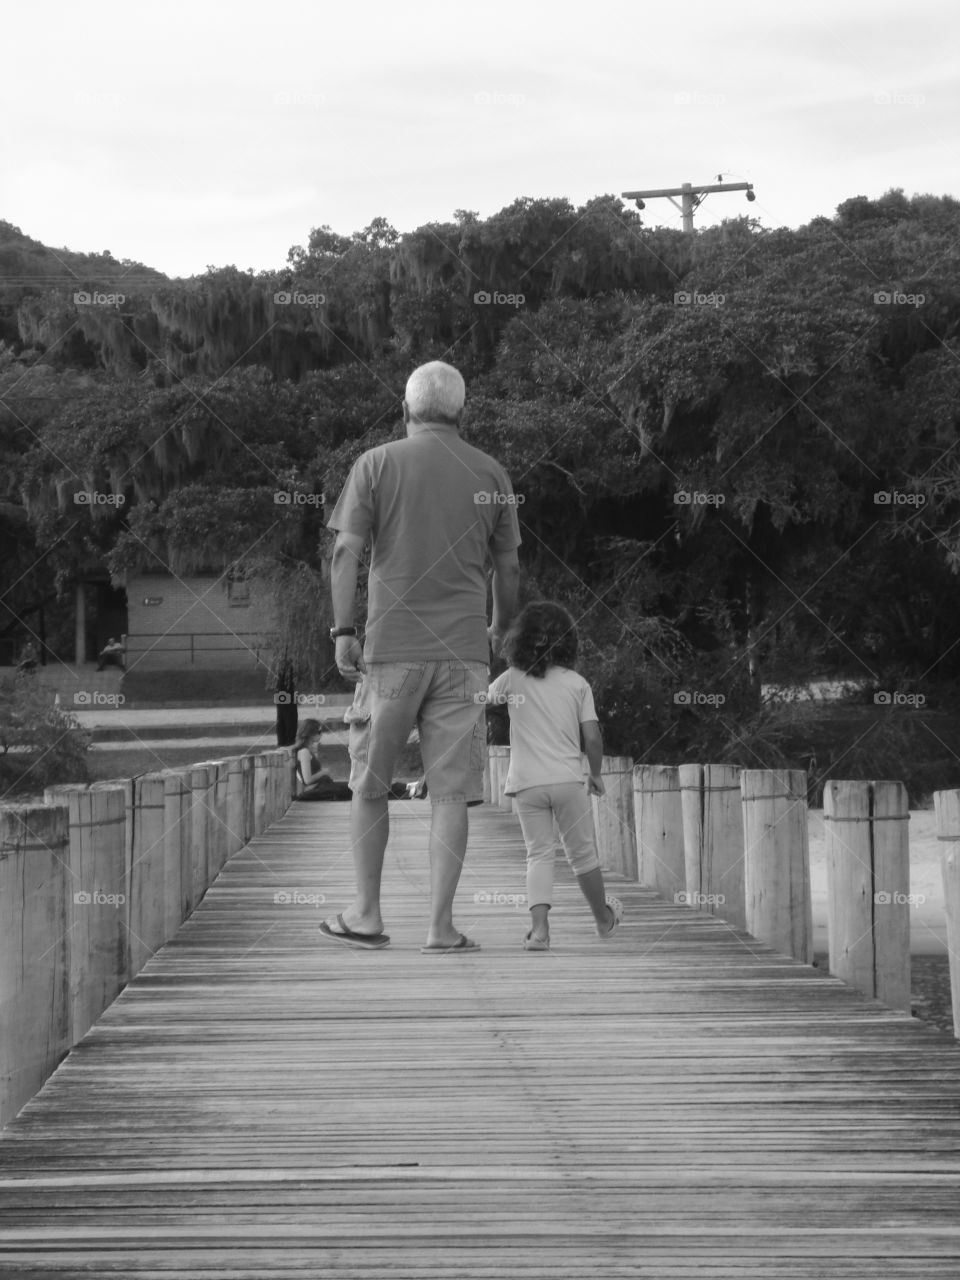 The Little Girl and the Grandfather